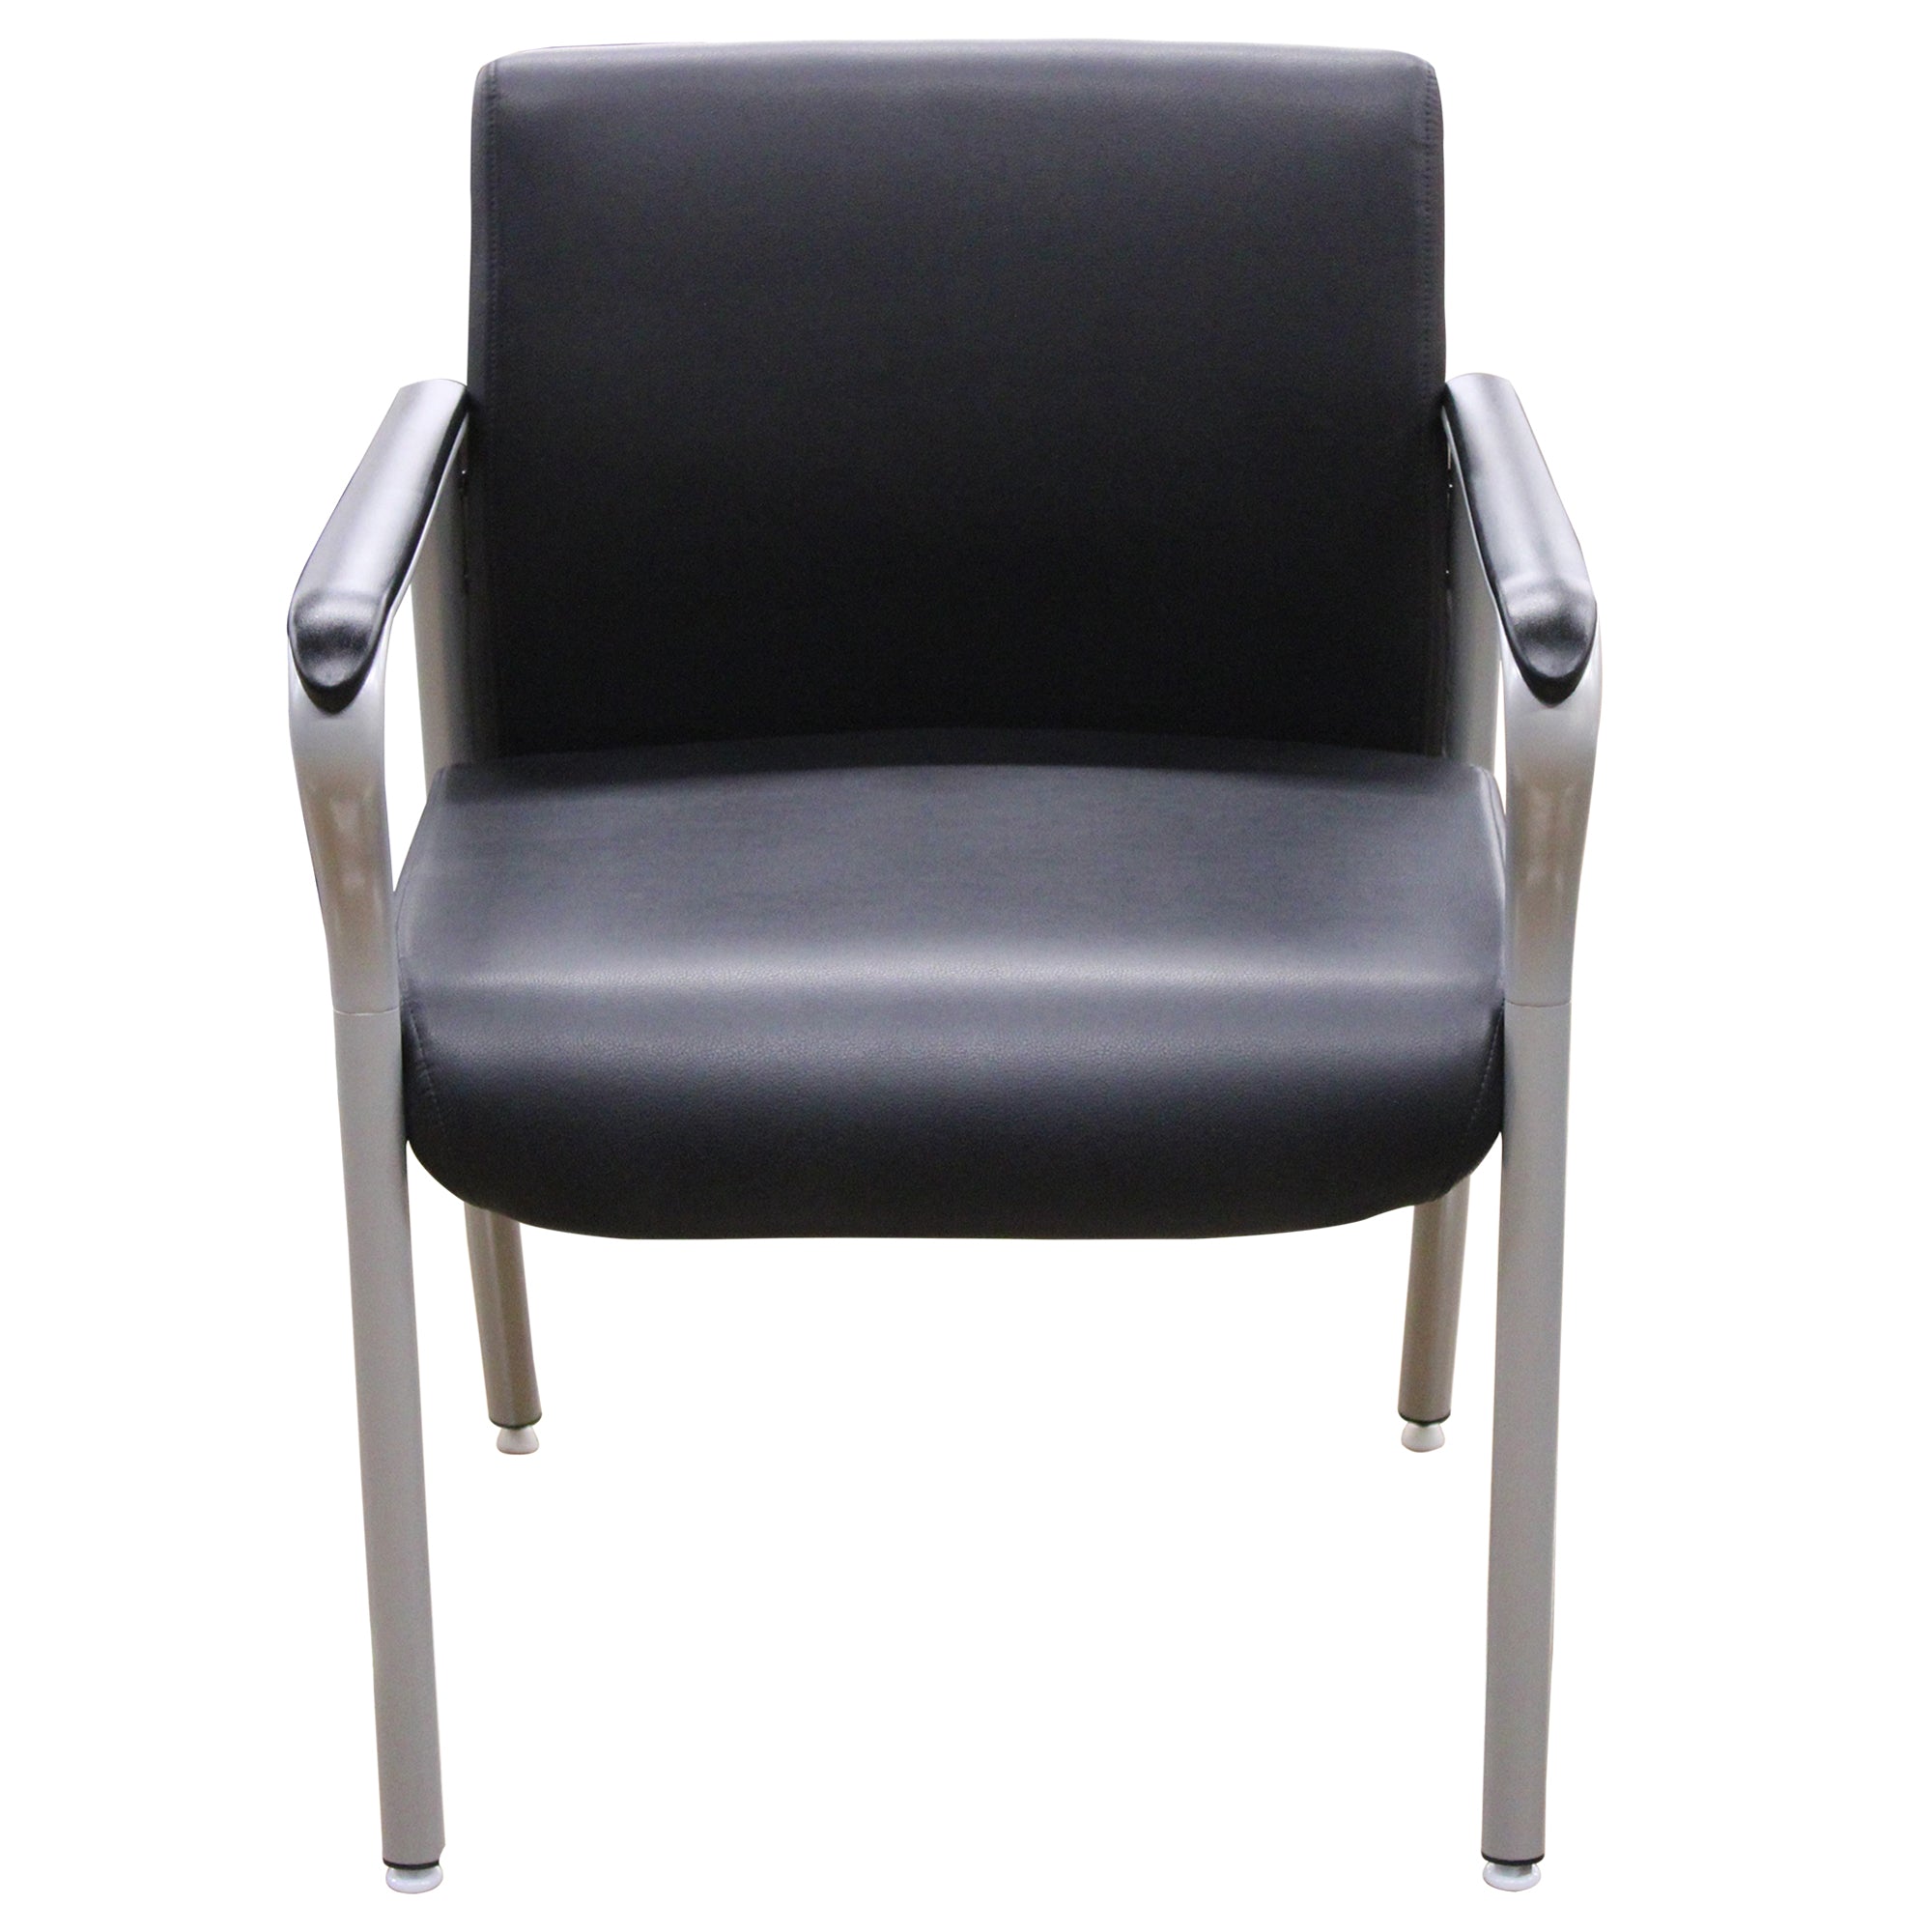 National Confide Guest Chair, Black - Preowned